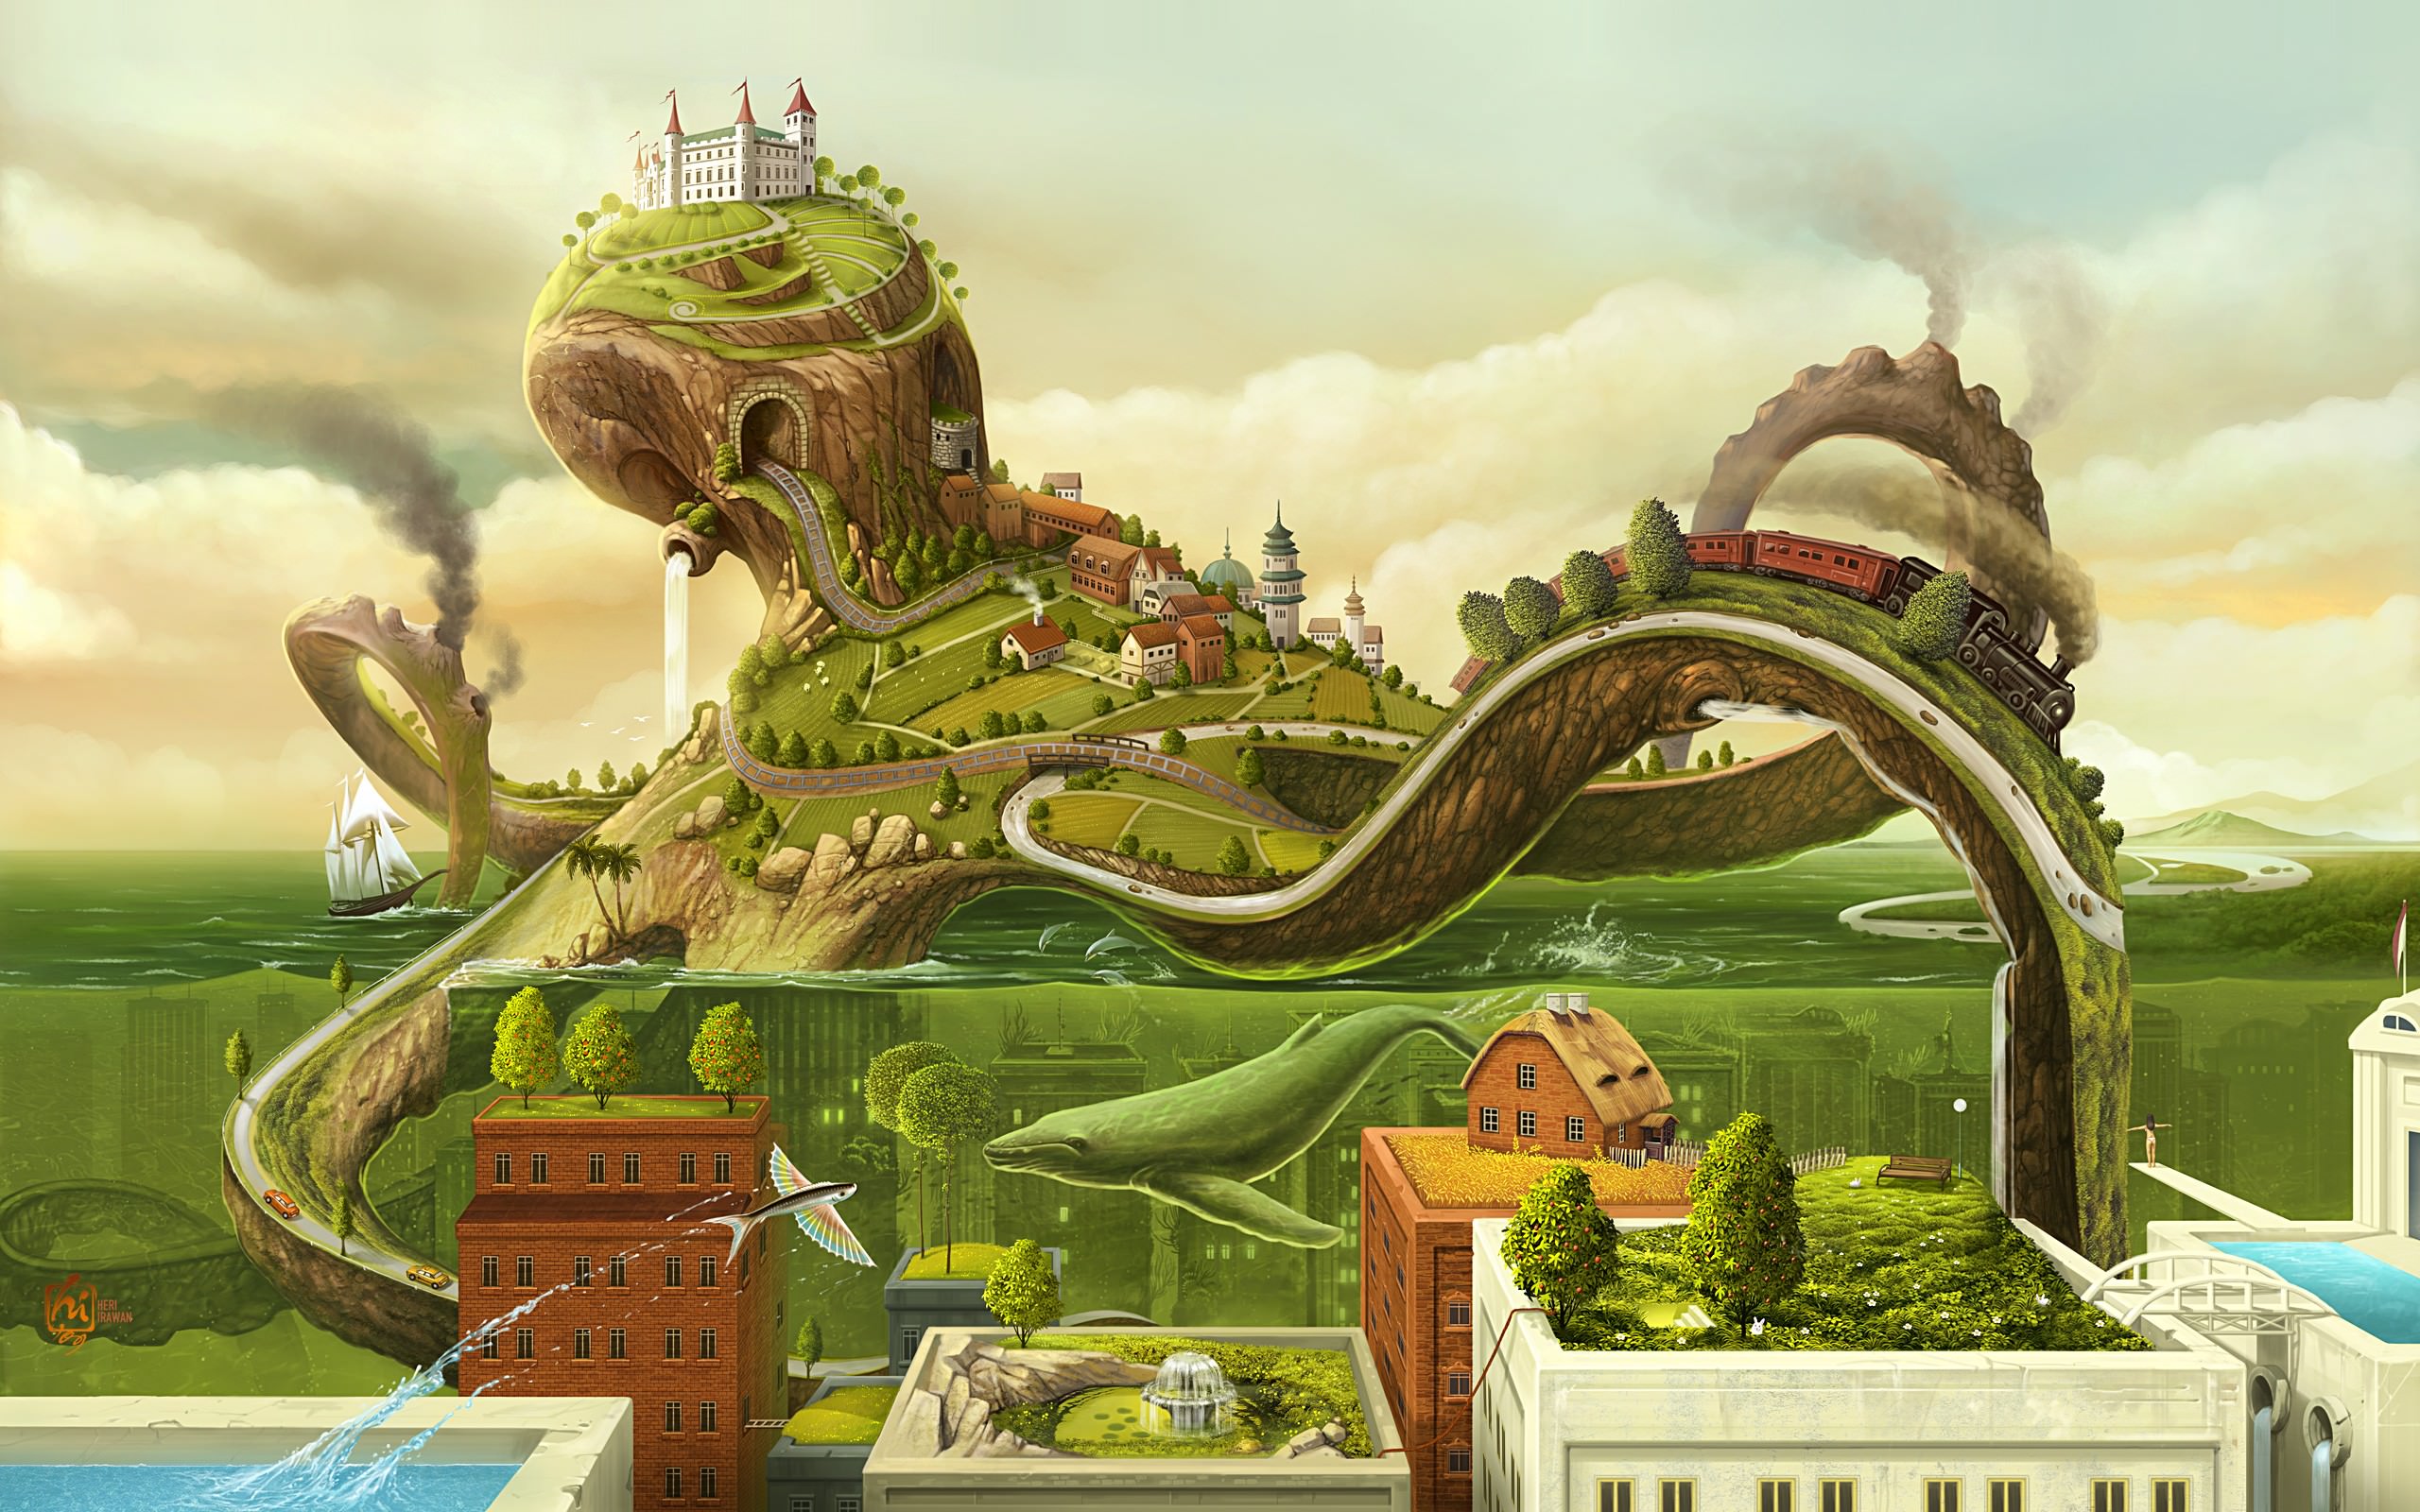 Surreal Wallpaper Featuring A City Merged With Huge Octopus